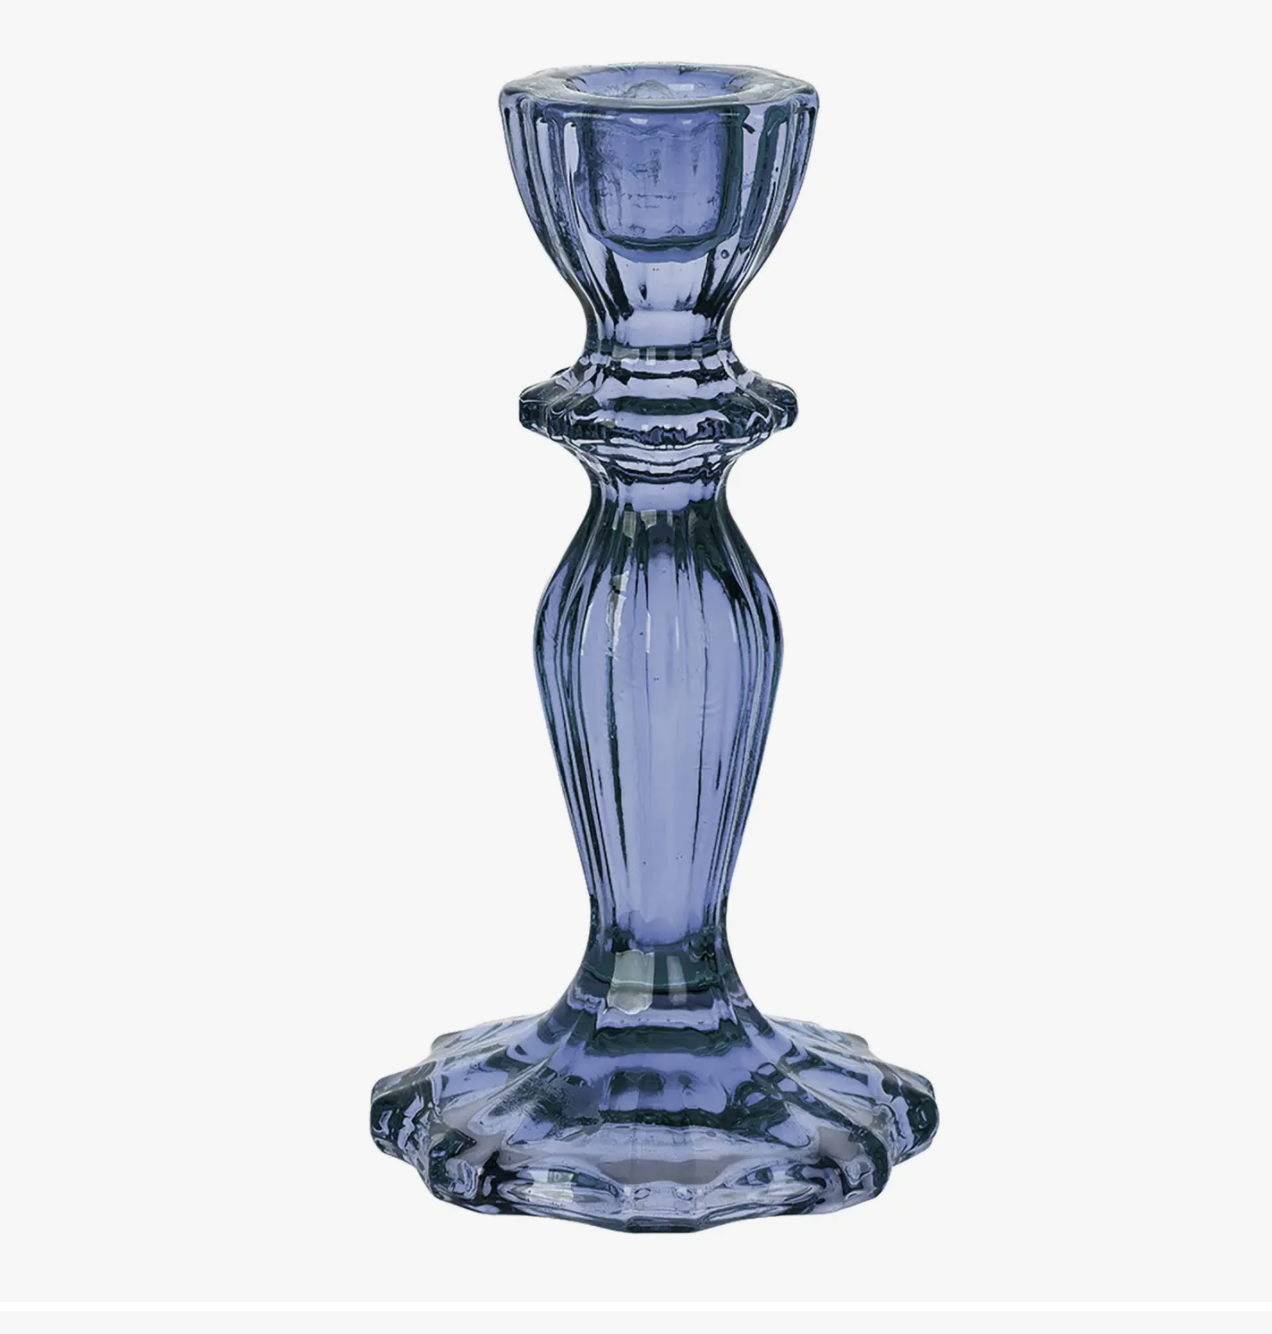 Antique-Style Glass Candle Holder